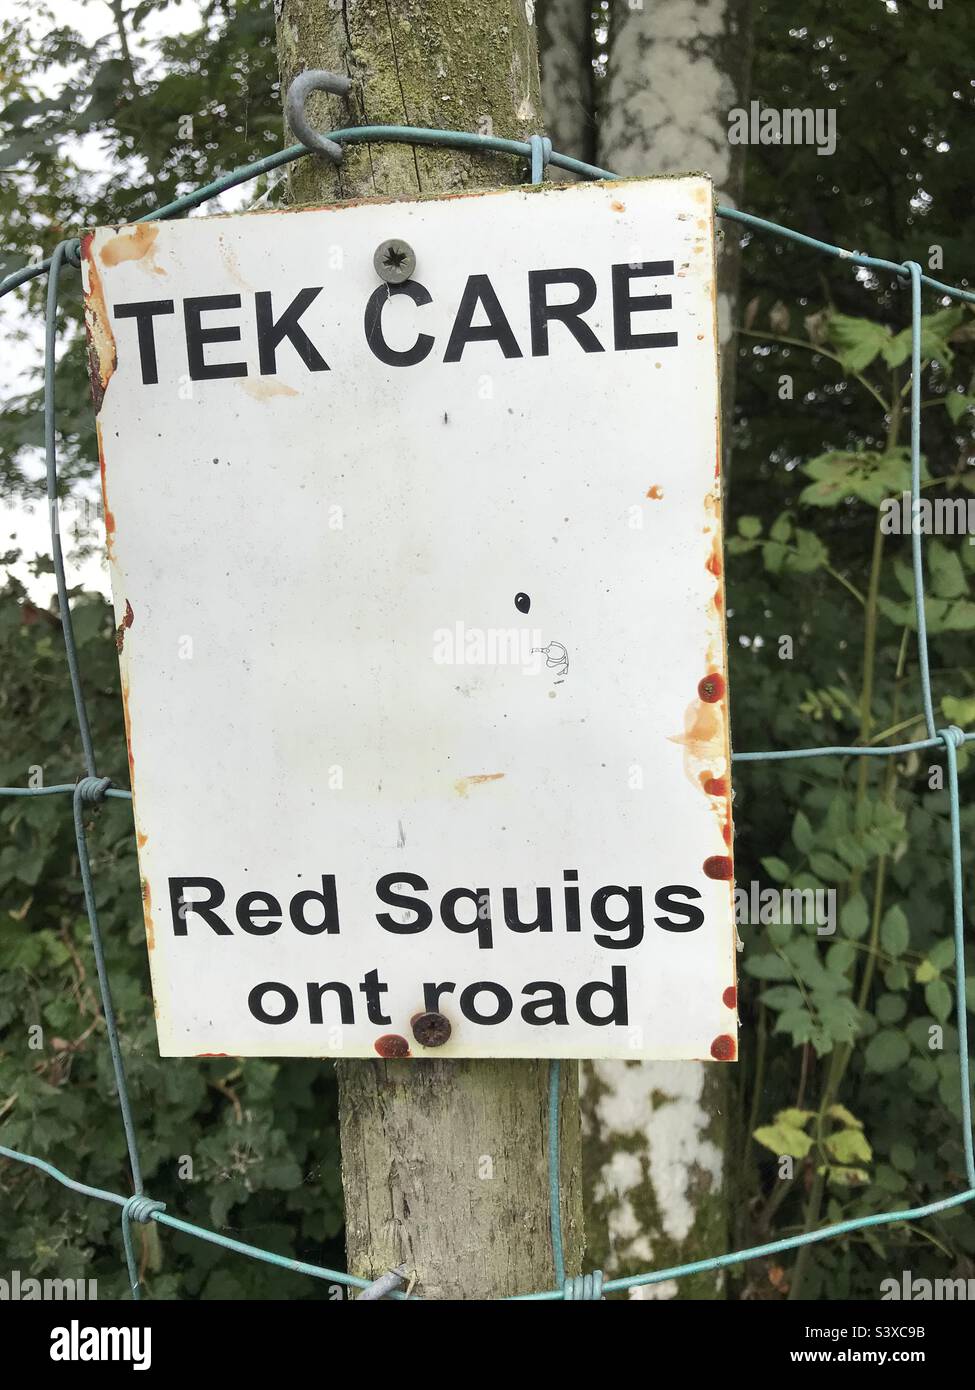 Yorkshire dialect warning sign Tek Care Take Care Red Squigs ont road Red squirrels on the road Stock Photo